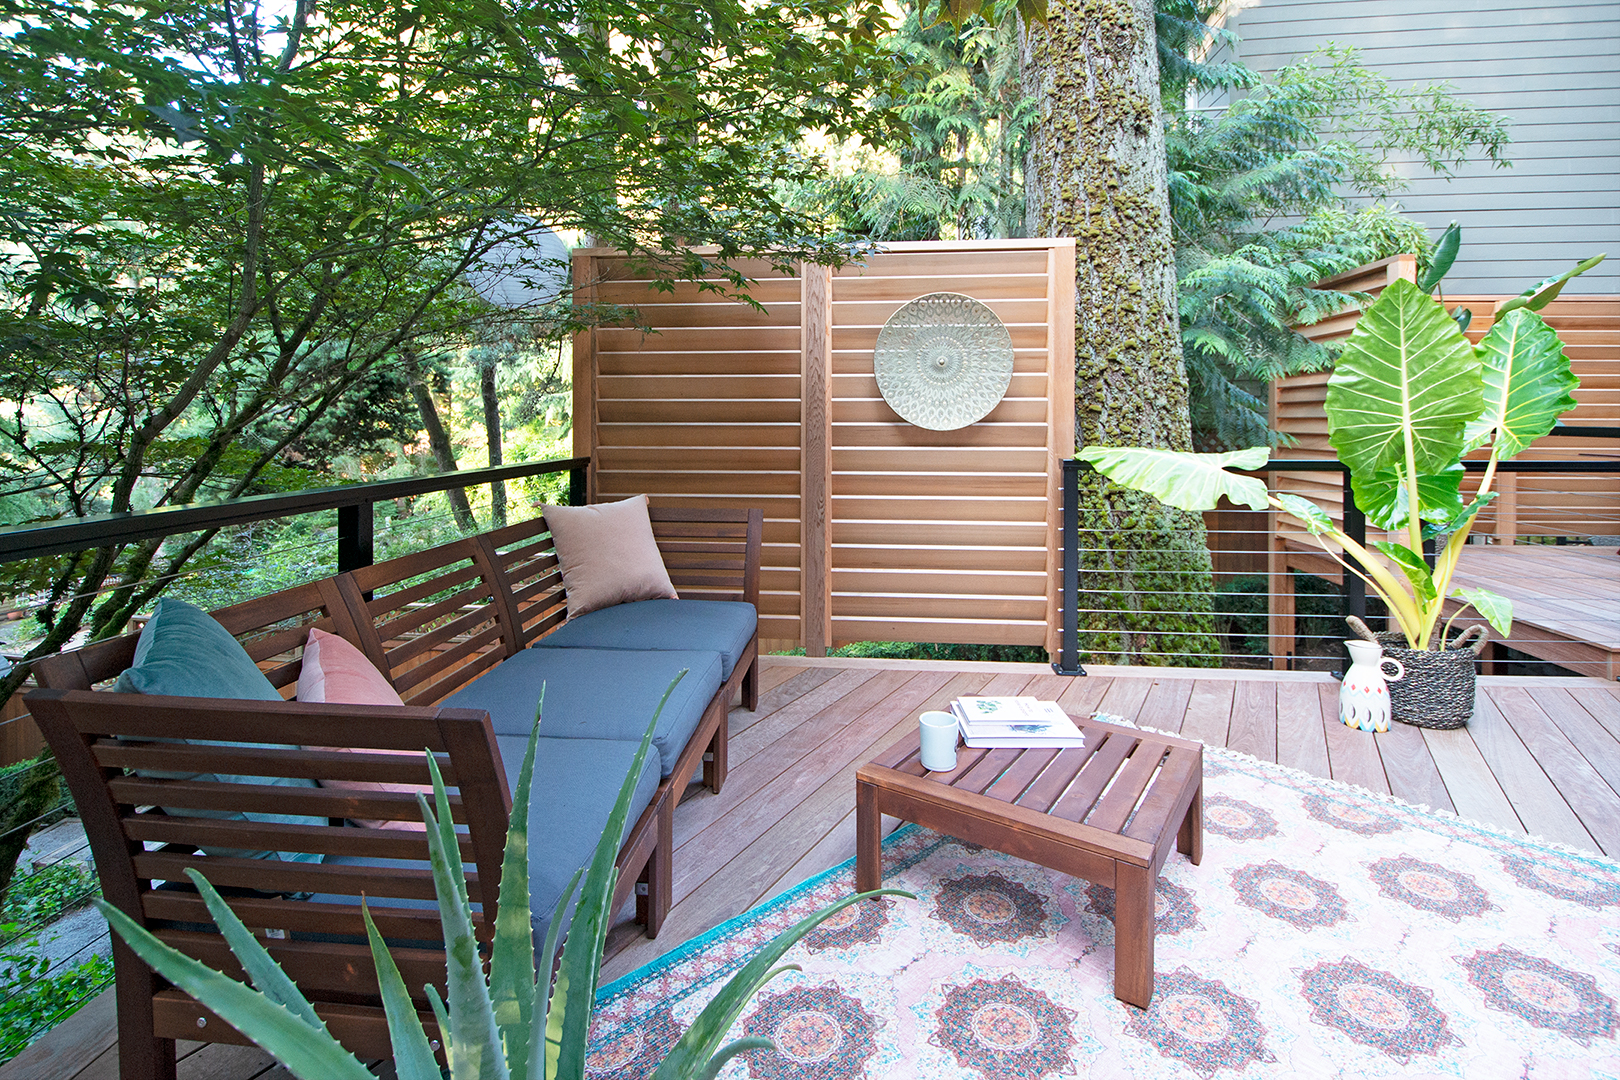 Image of a Camas Outdoor Living Room Design and Build by Drake's 7 Dees